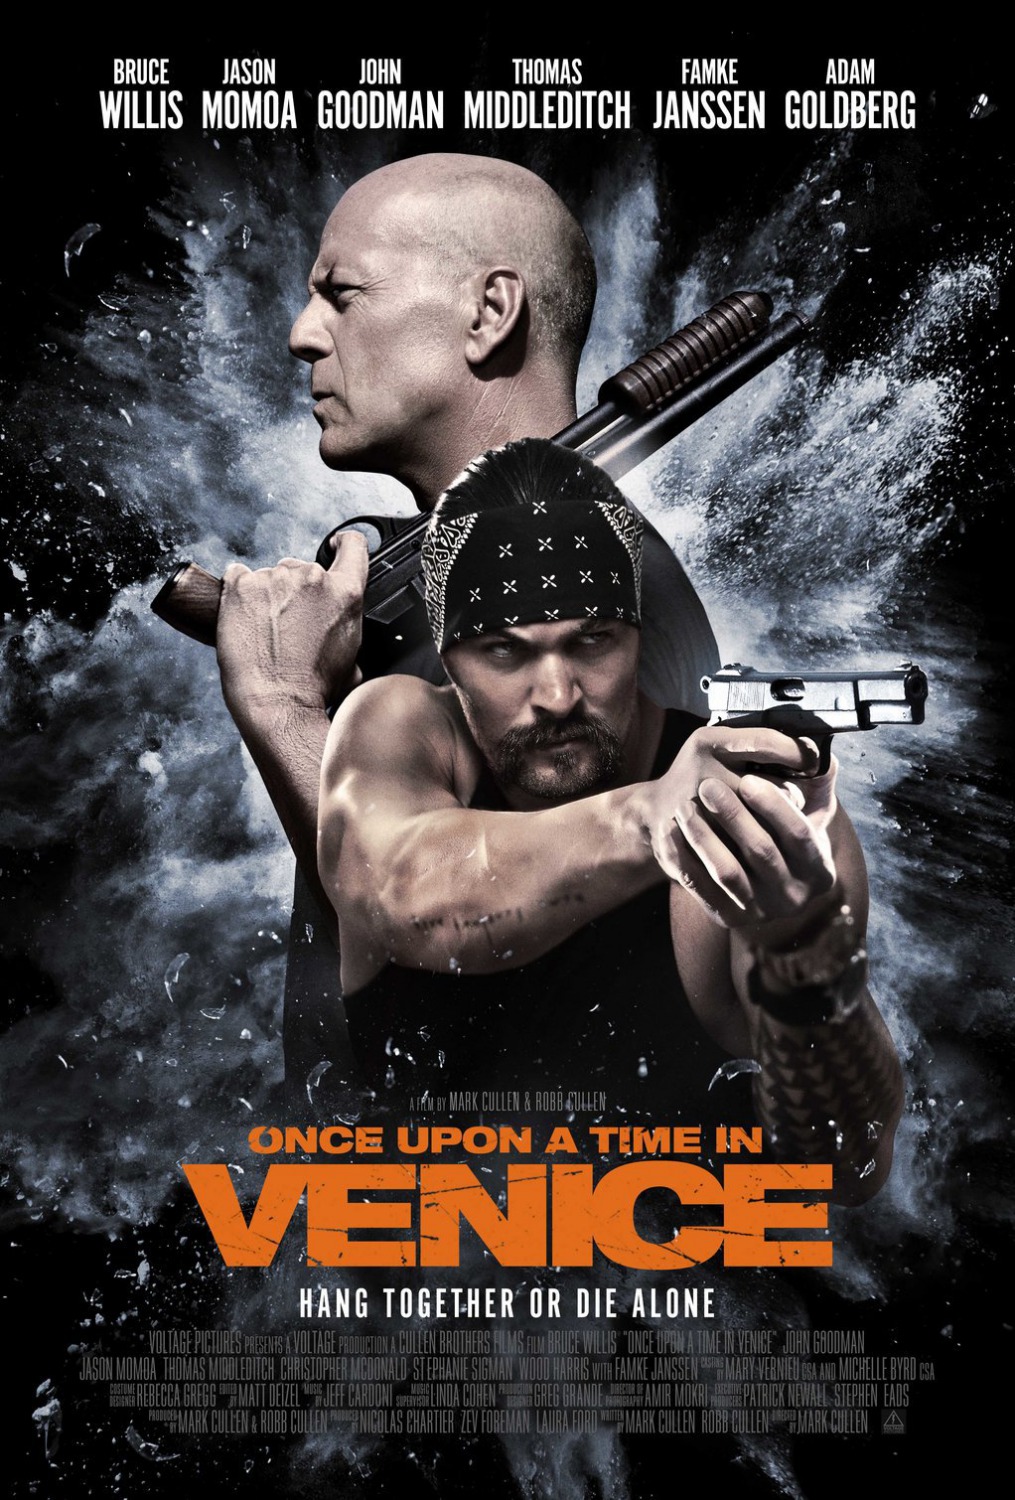 Once Upon a Time in Venice (#3 of 4): Extra Large Movie Poster Image - Once Upon A Time In Venice 2017